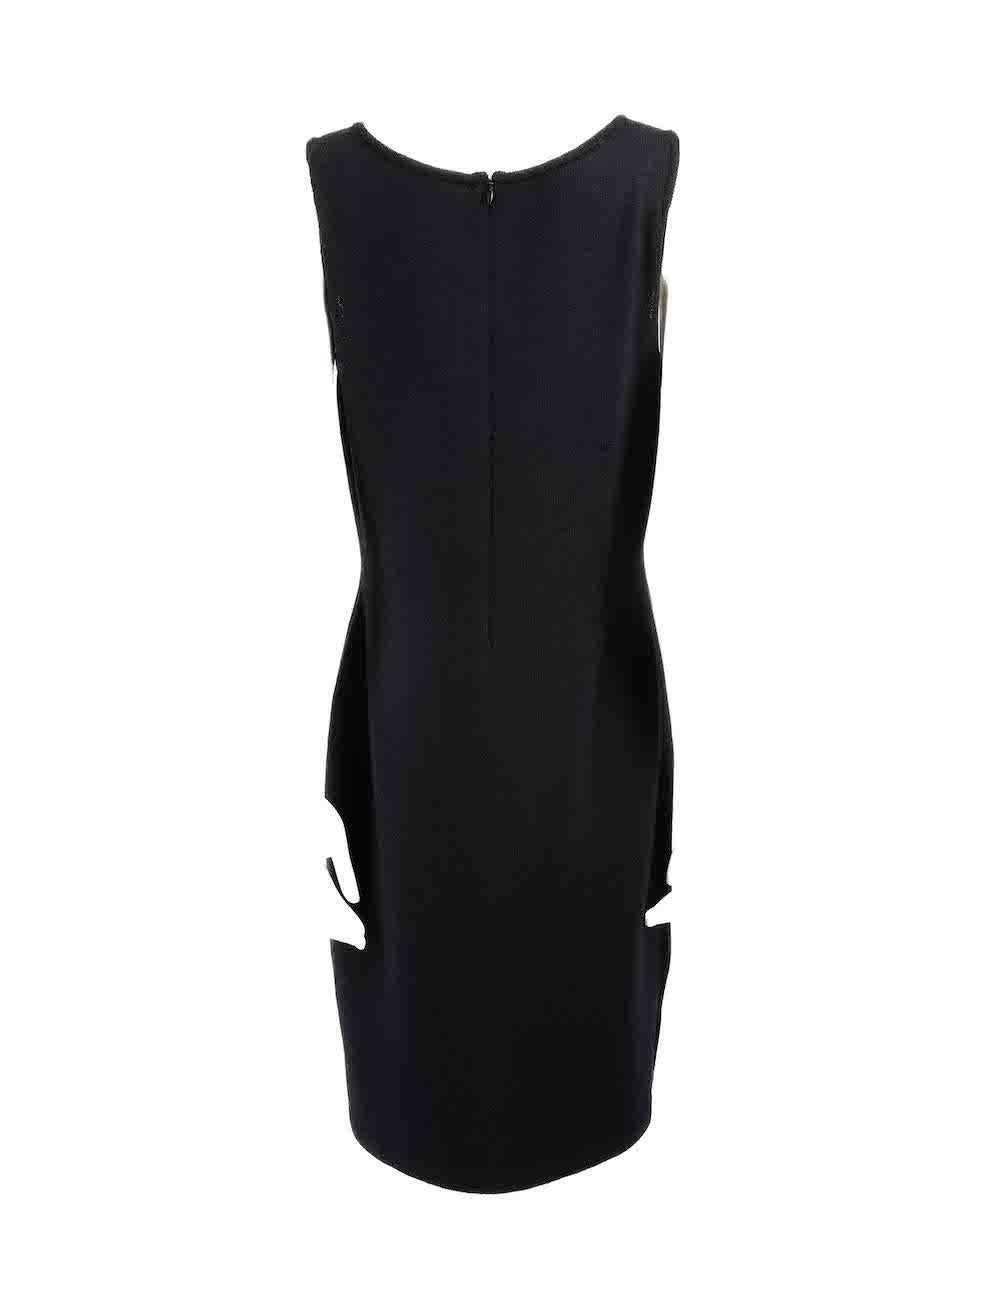 St. John Navy Wool Sleeveless Knee Length Dress Size L In New Condition For Sale In London, GB